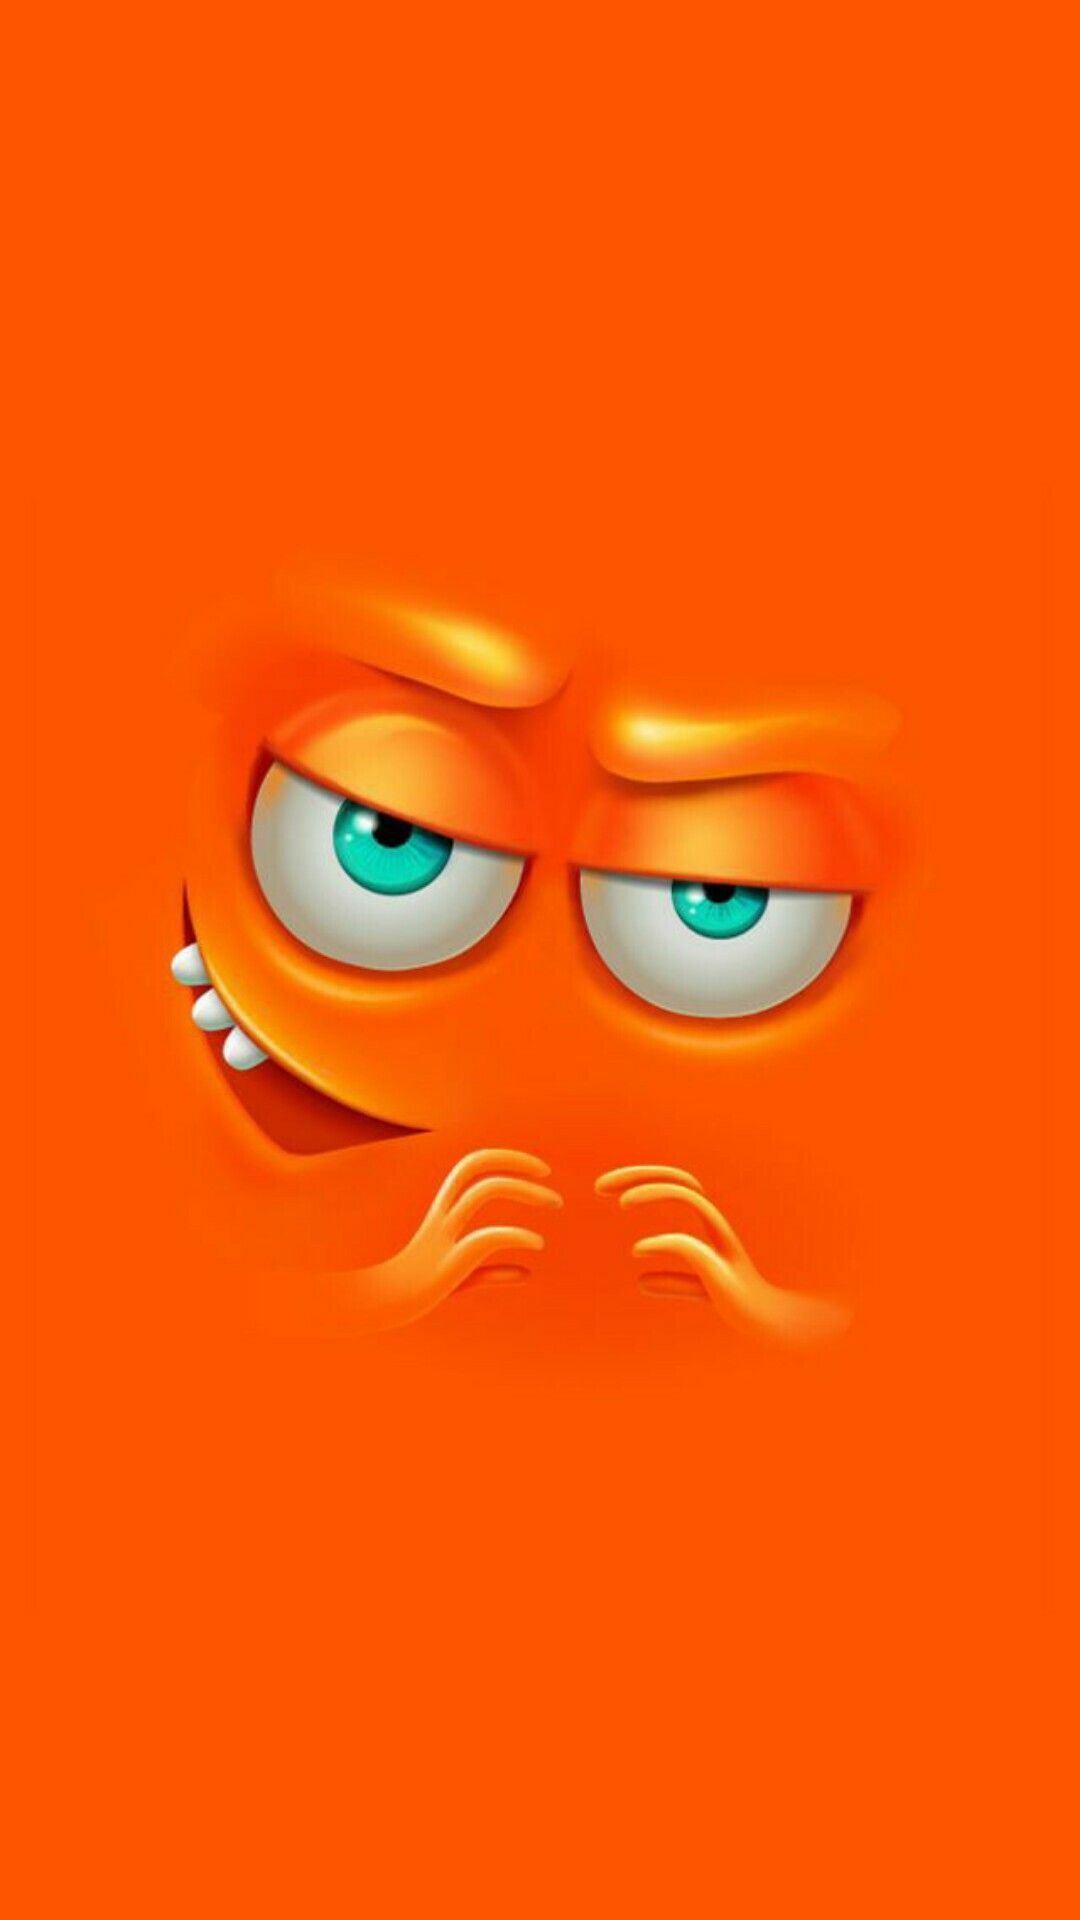 Silly Face Wallpaper Free Silly Face Background - Wallpaper iphone cute, Cartoon wallpaper, Cartoon wallpaper hd